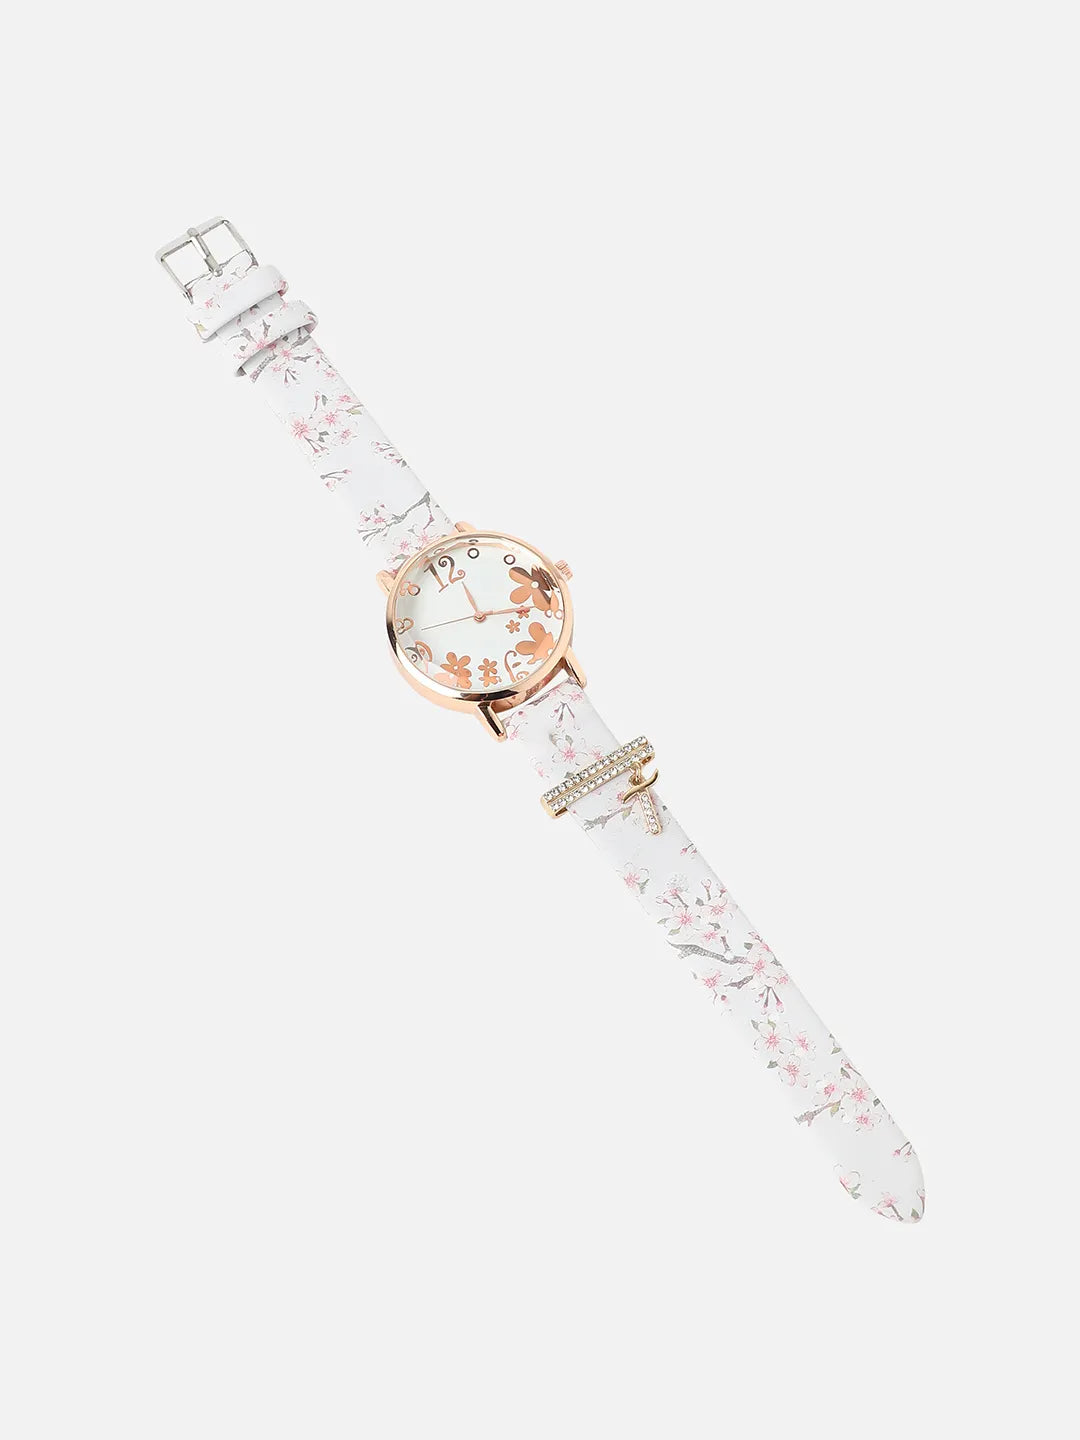 Round Analog Watch With T Liberty Initial Watch Charm - White